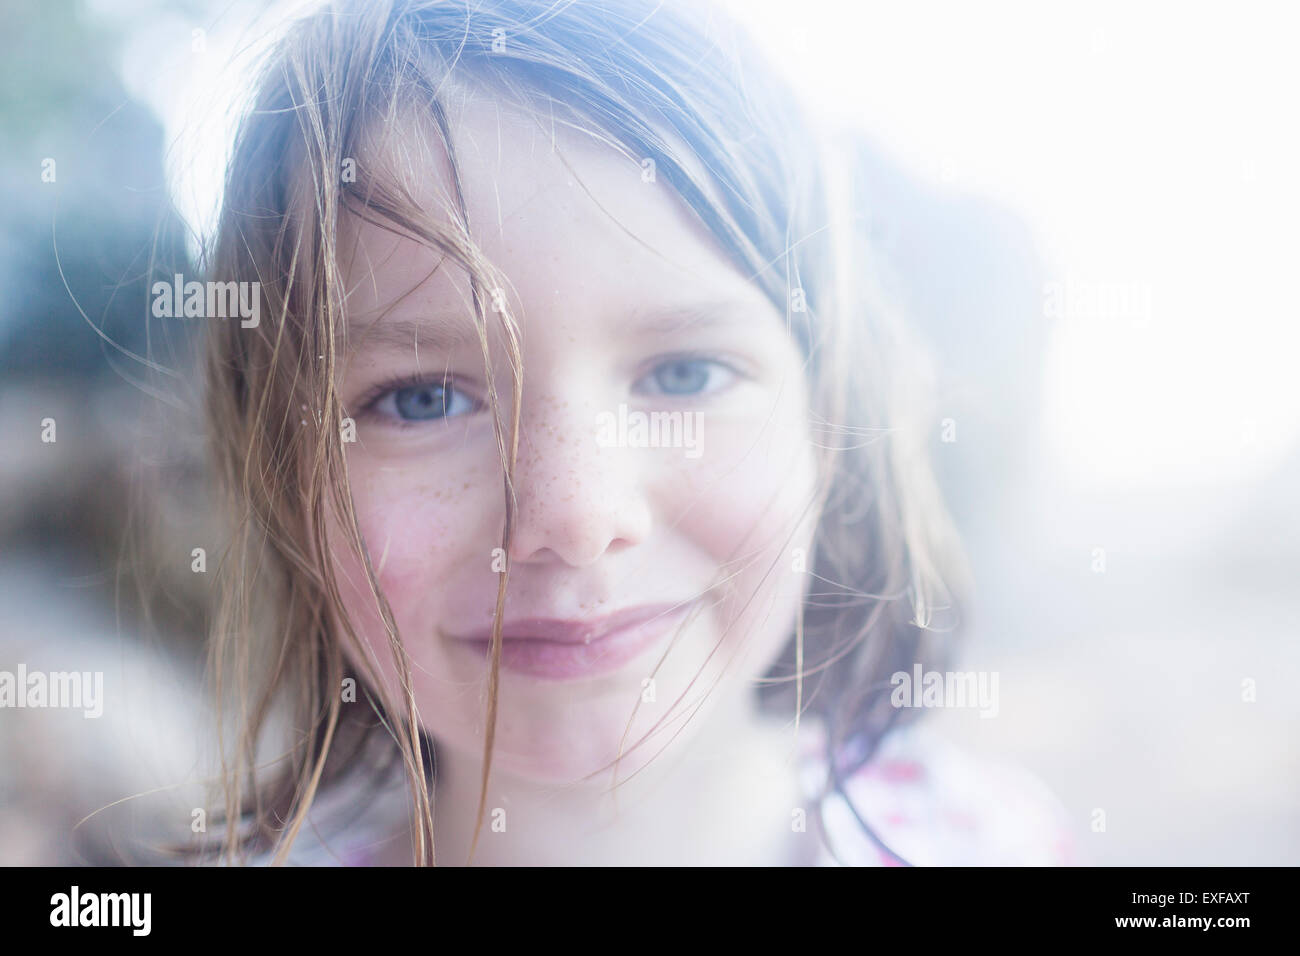 Happy and contented girl Stock Photo